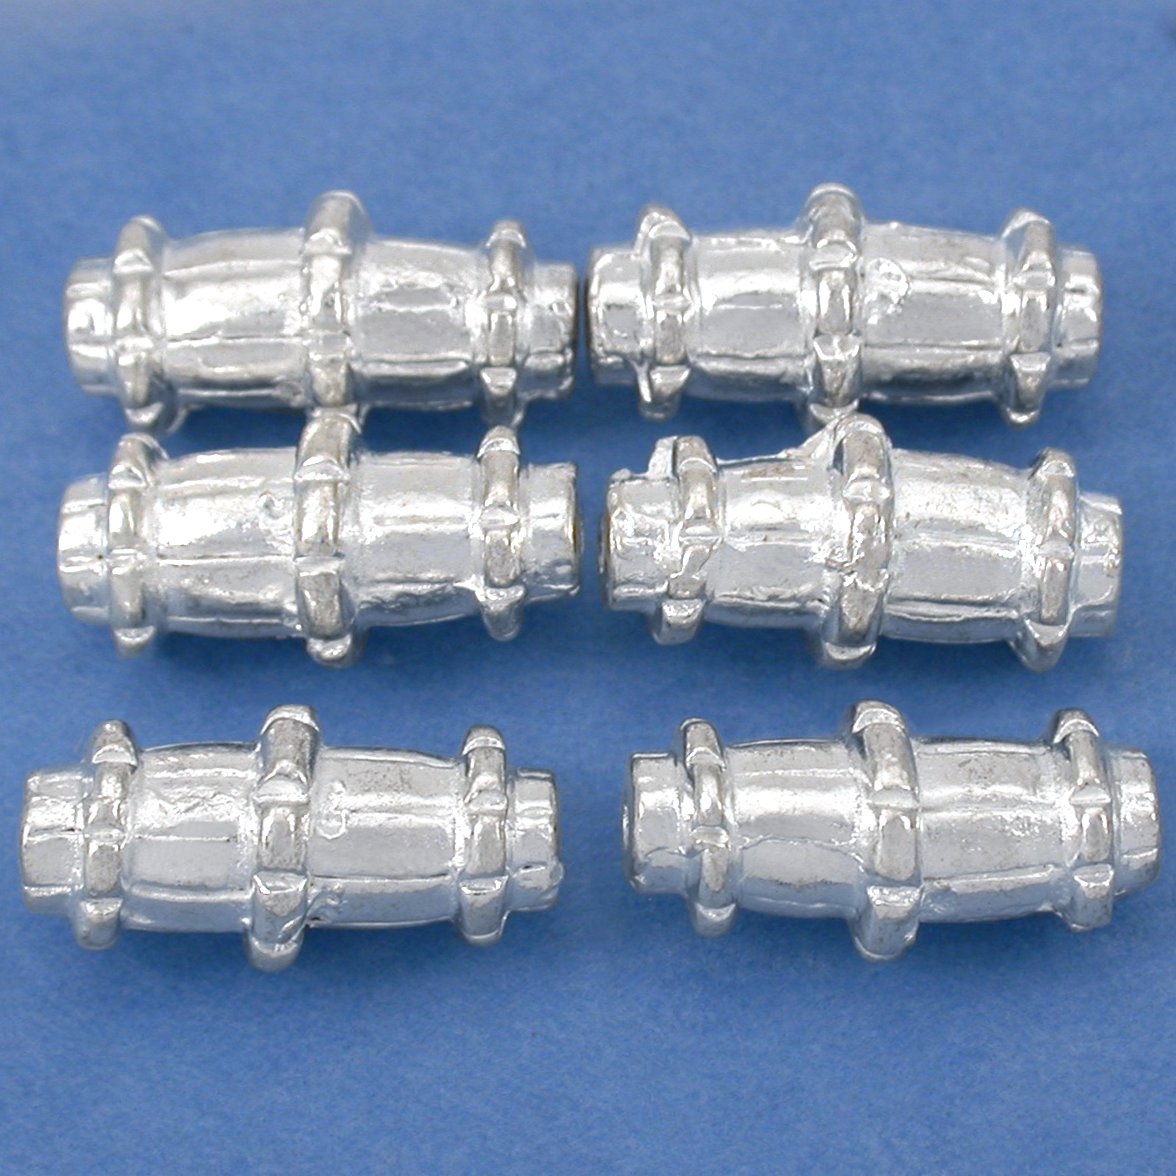 Bali Tube Silver Plated Beads 17mm 15 Grams 6Pcs Approx.